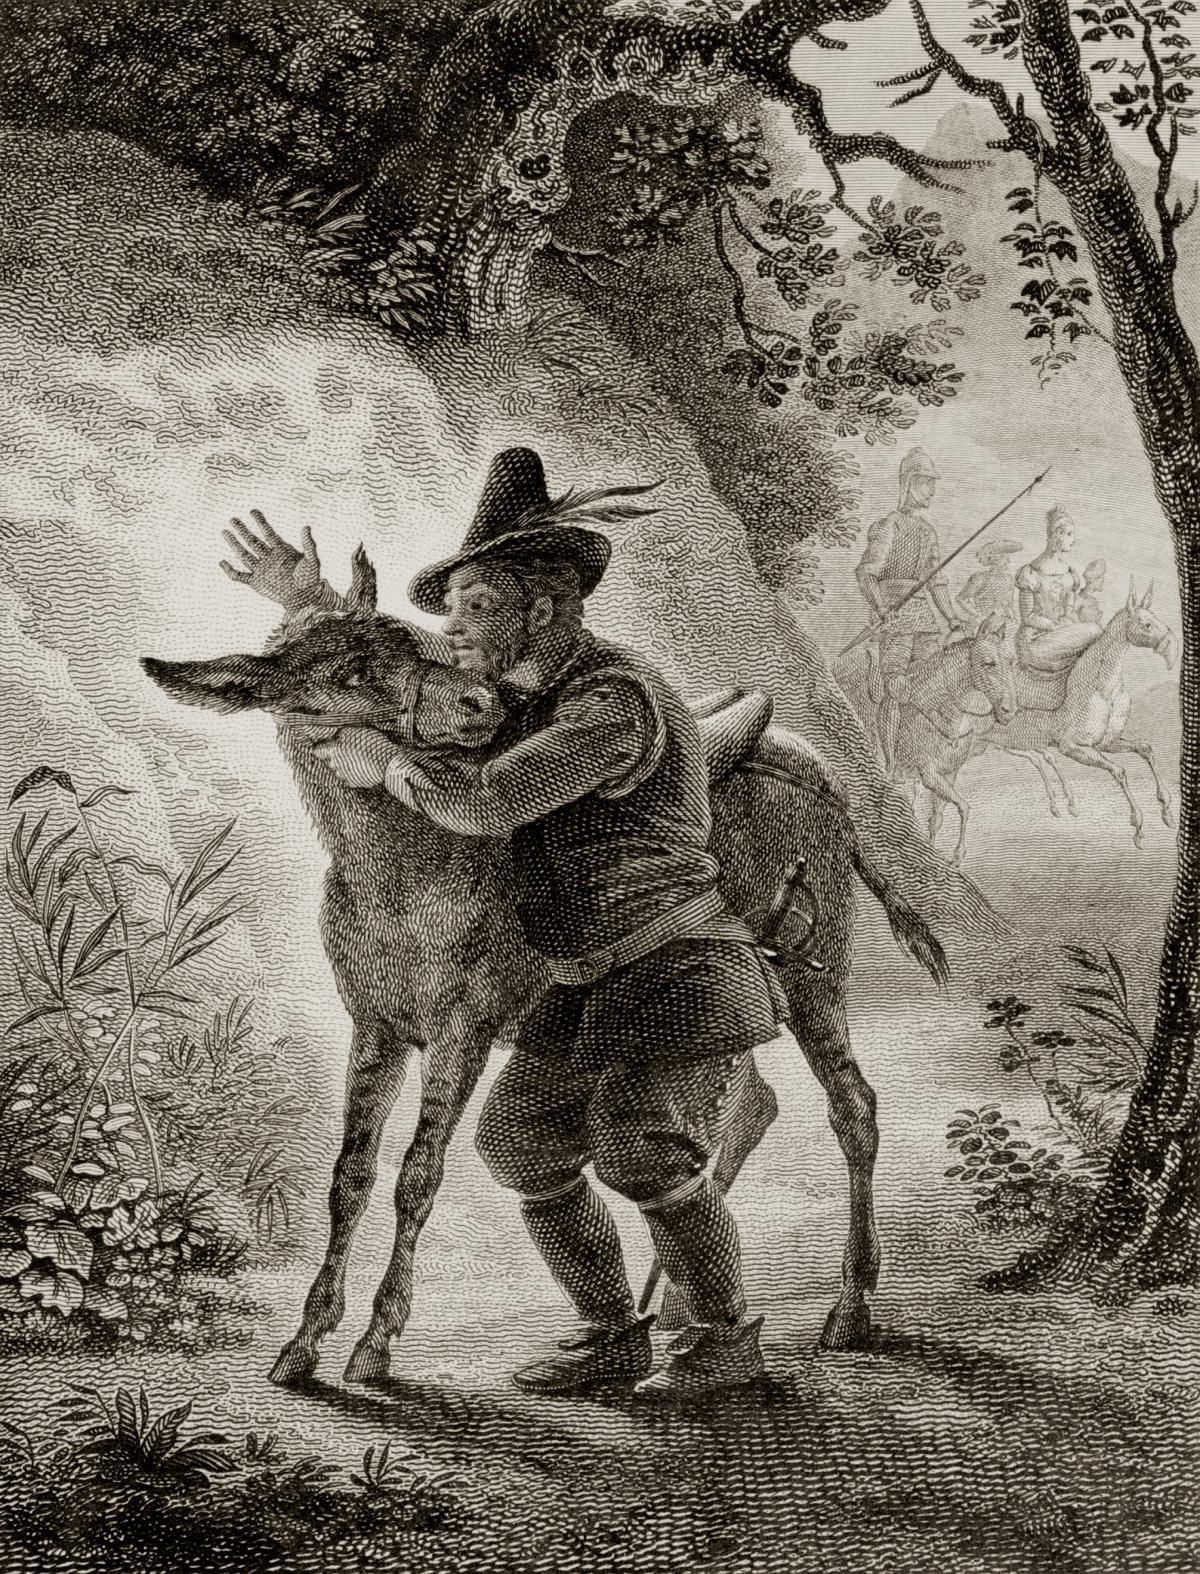 Engraving of a man embracing a donkey